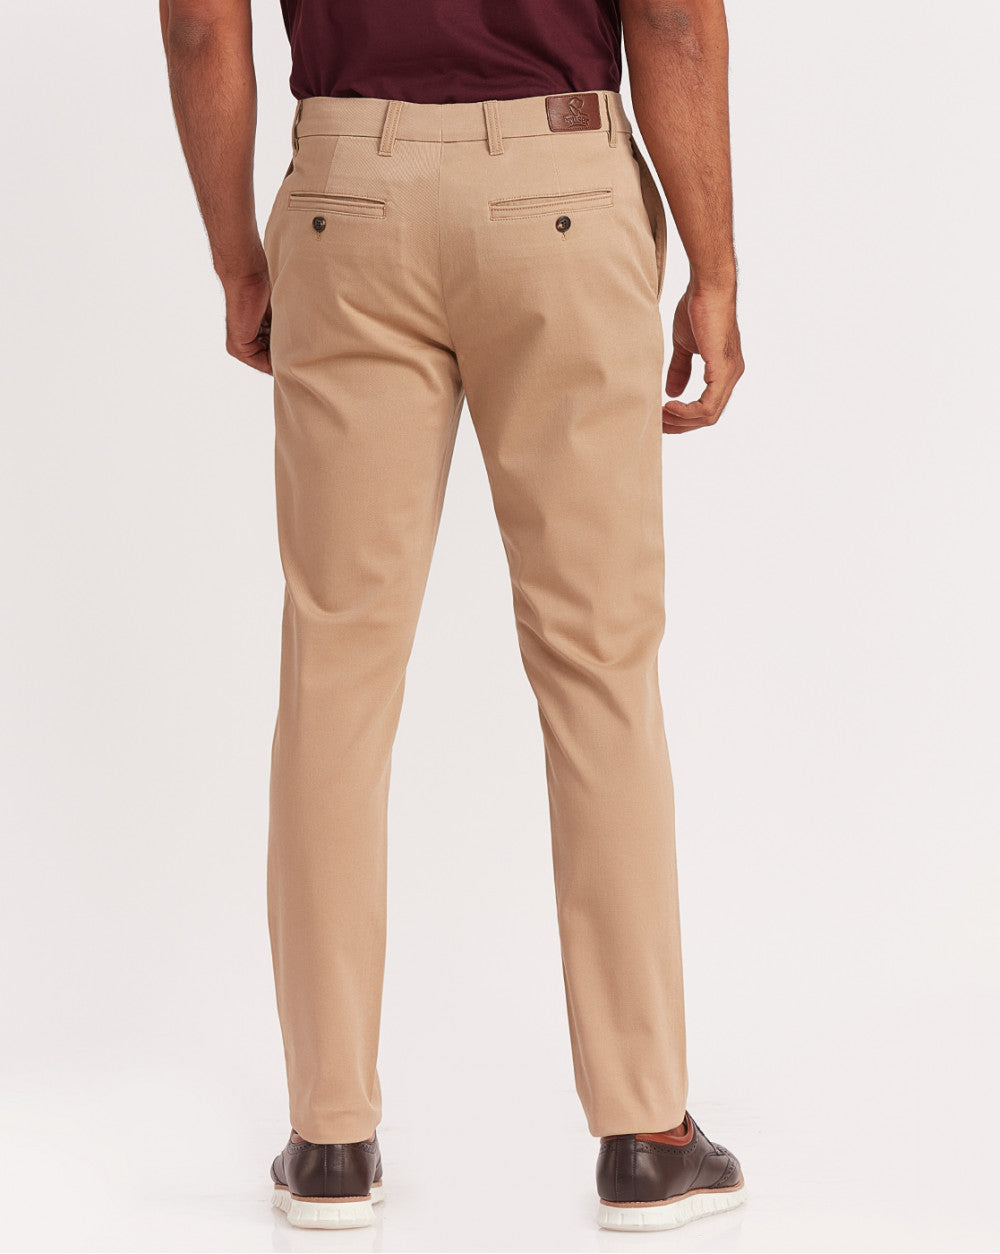 Tapered Fit Urban Chinos - Camel Brown